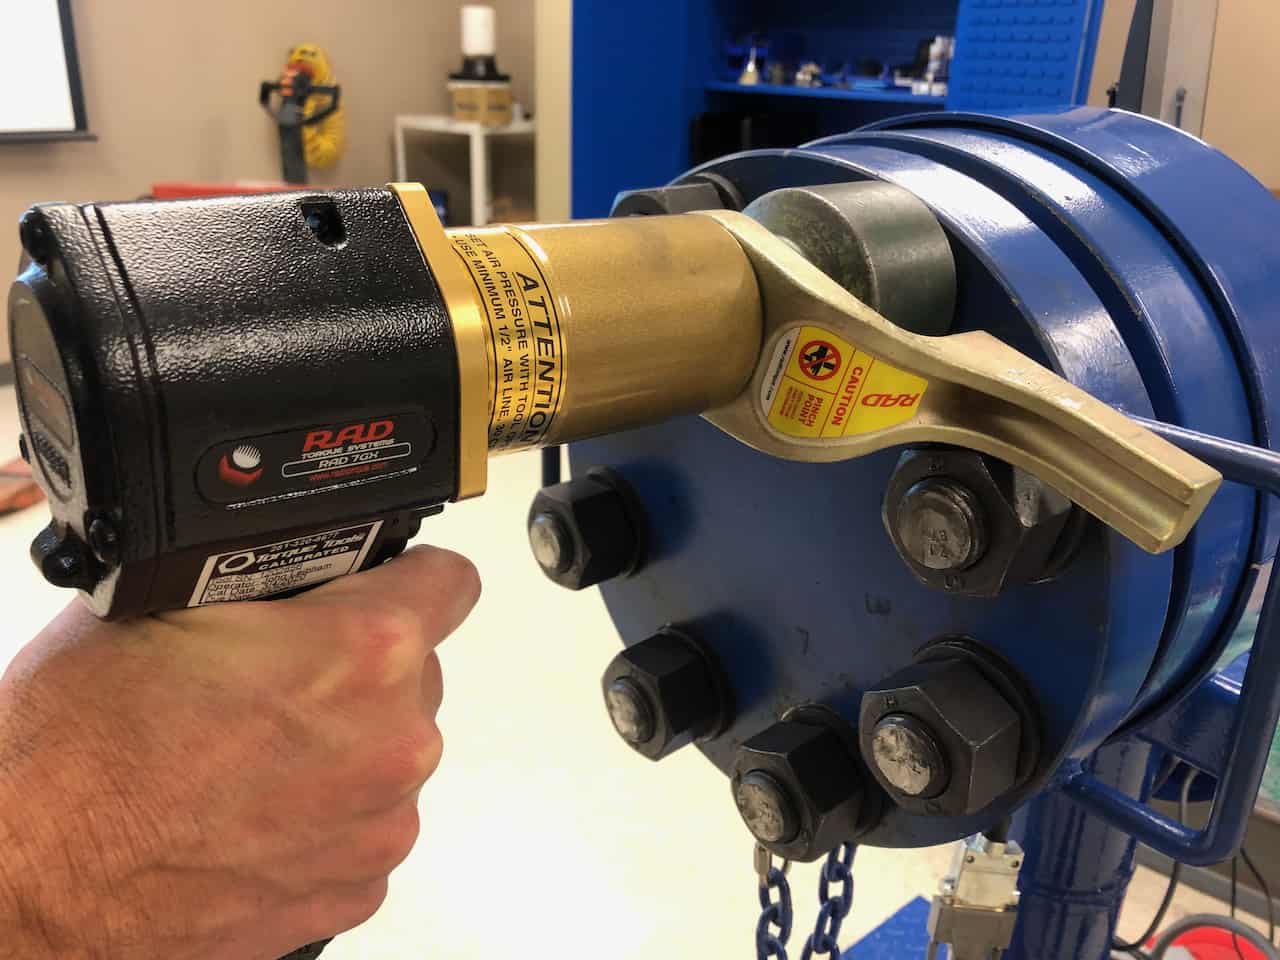 Bolting Applications with Pistol Grip Torque Wrenches